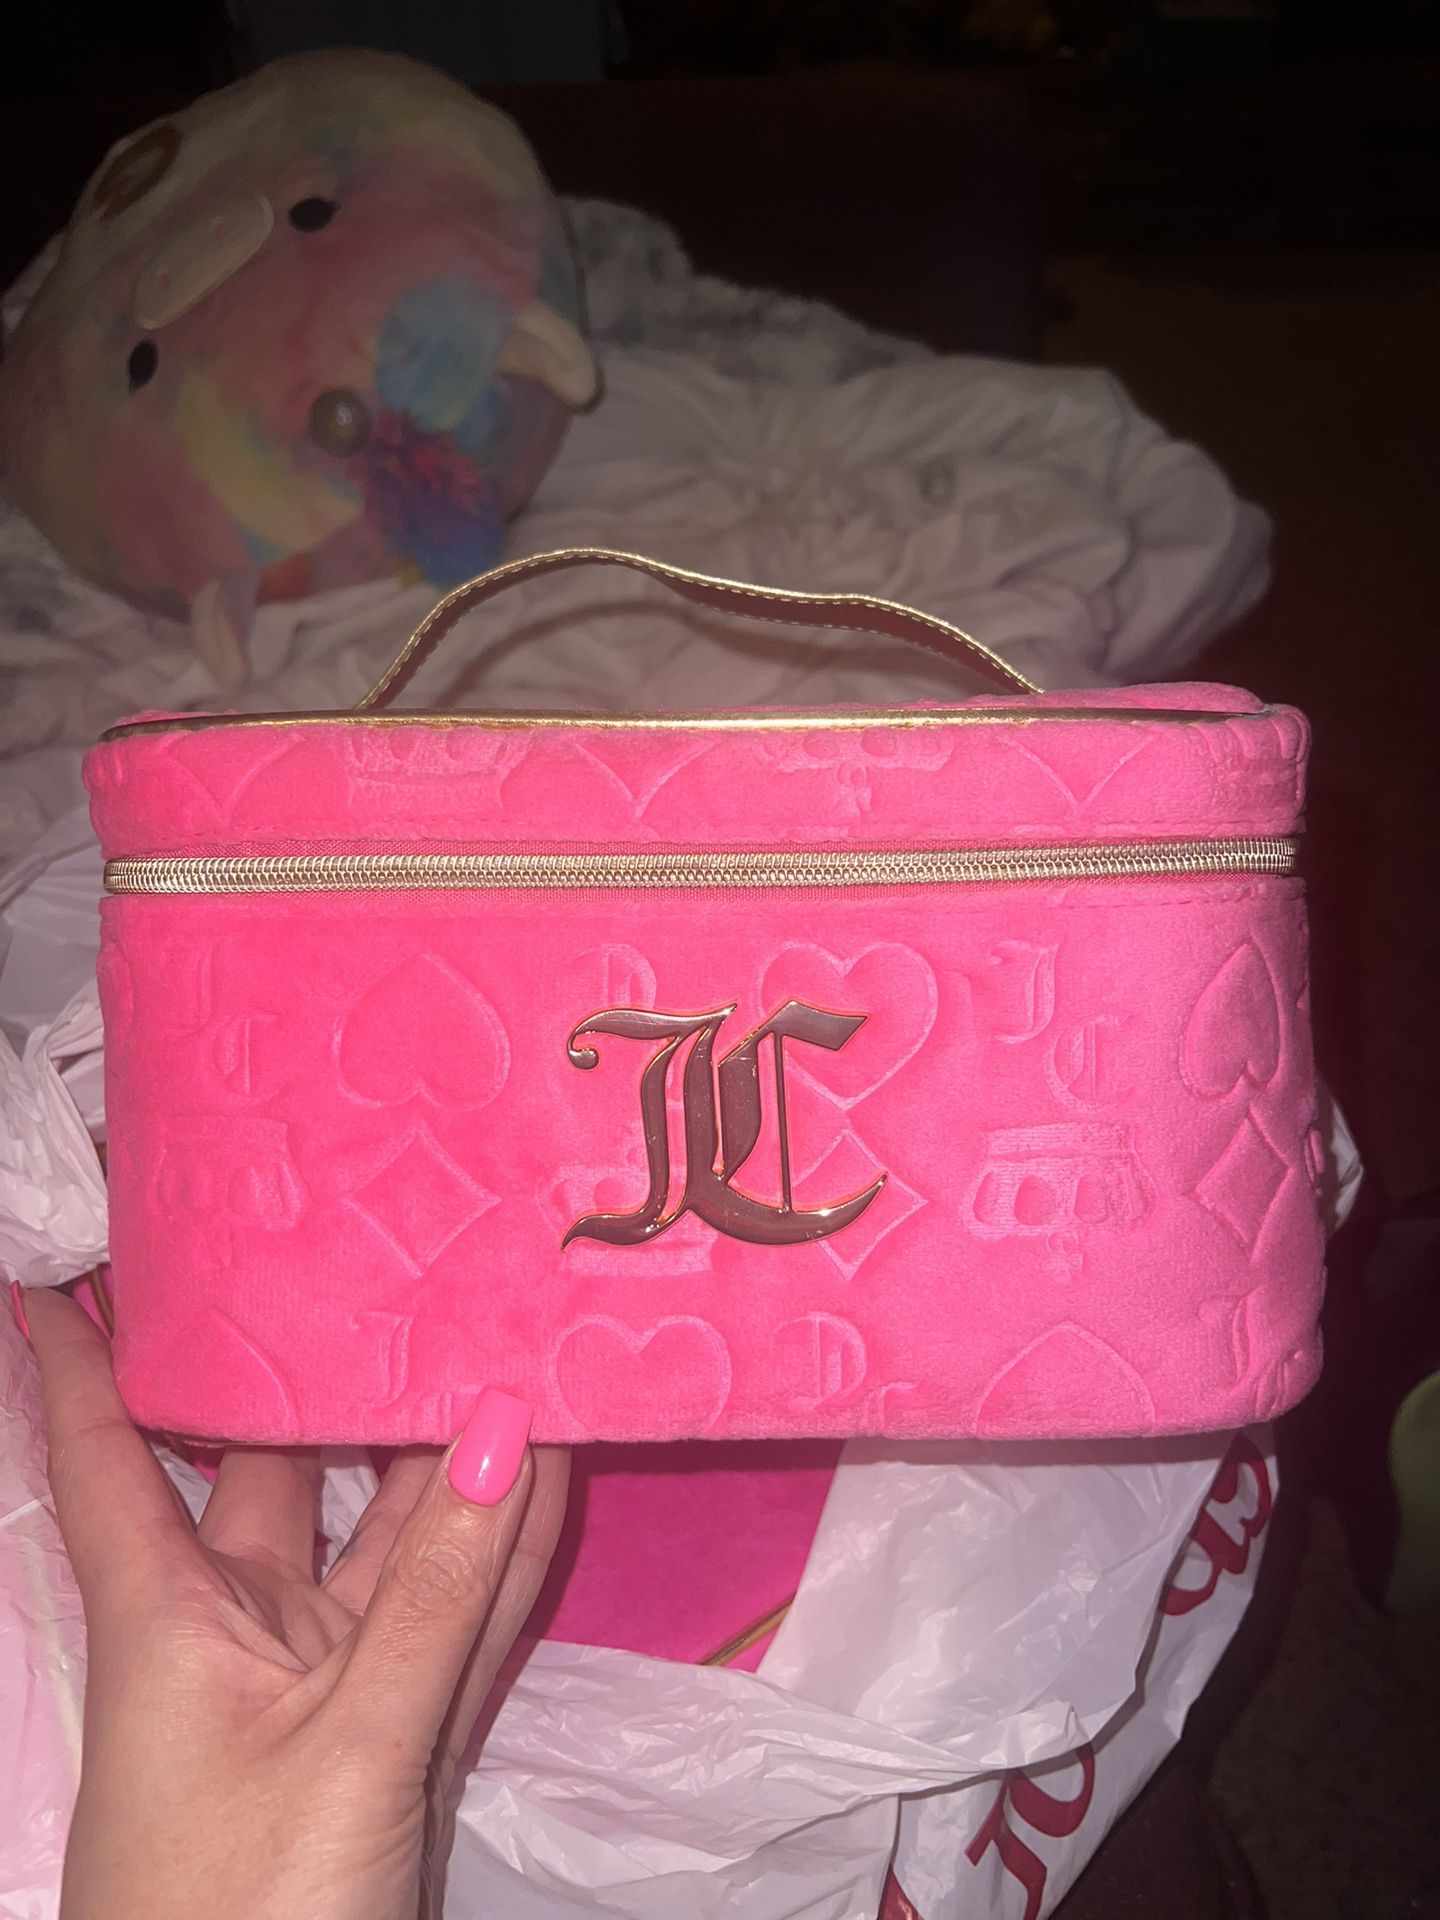 Multiple Juicy Couture Makeup Cases 